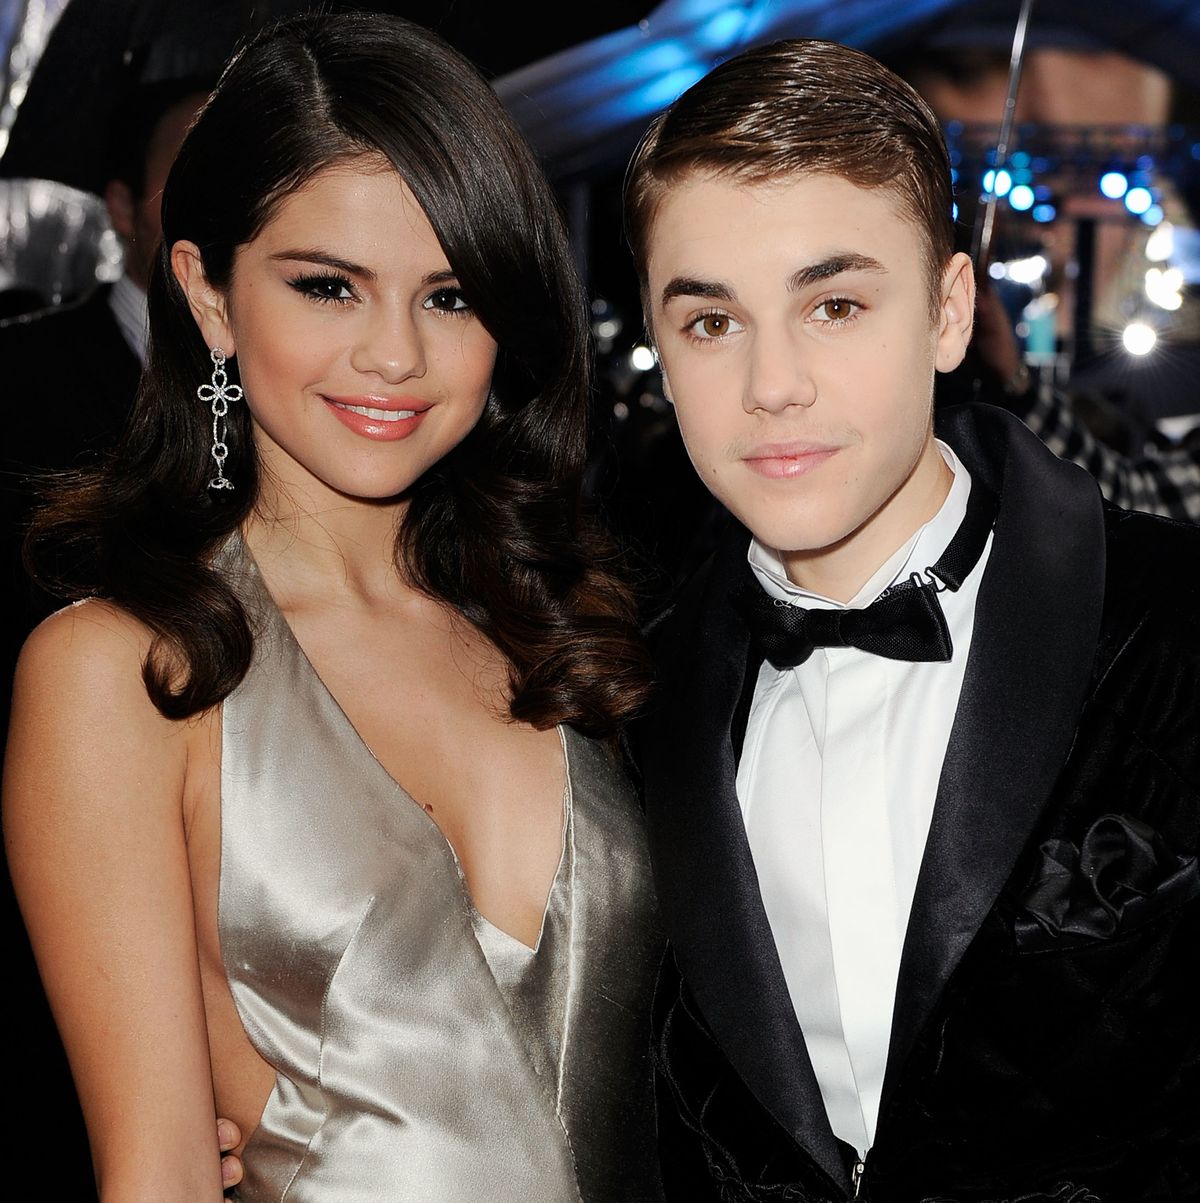 Controversy: Selena Gomez suddenly opened up about breaking up with Justin Bieber, Hailey took advantage of her husband to respond?  - Photo 2.